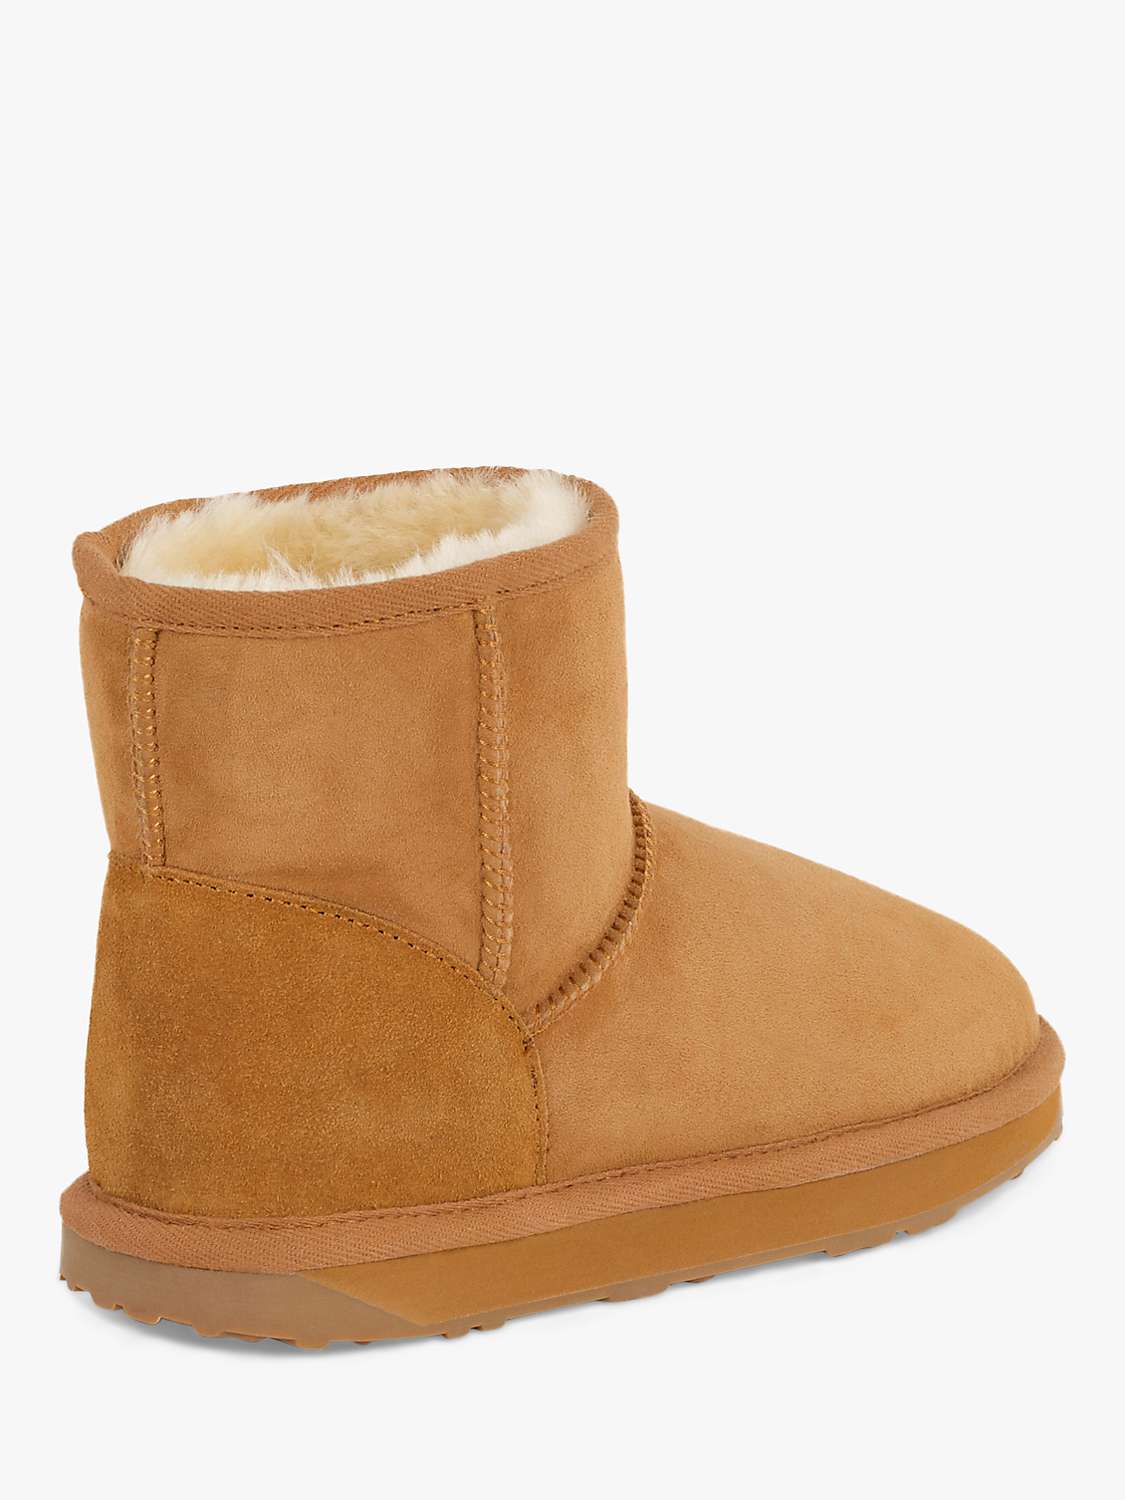 Buy Just Sheepskin Mini Classic Boots Online at johnlewis.com